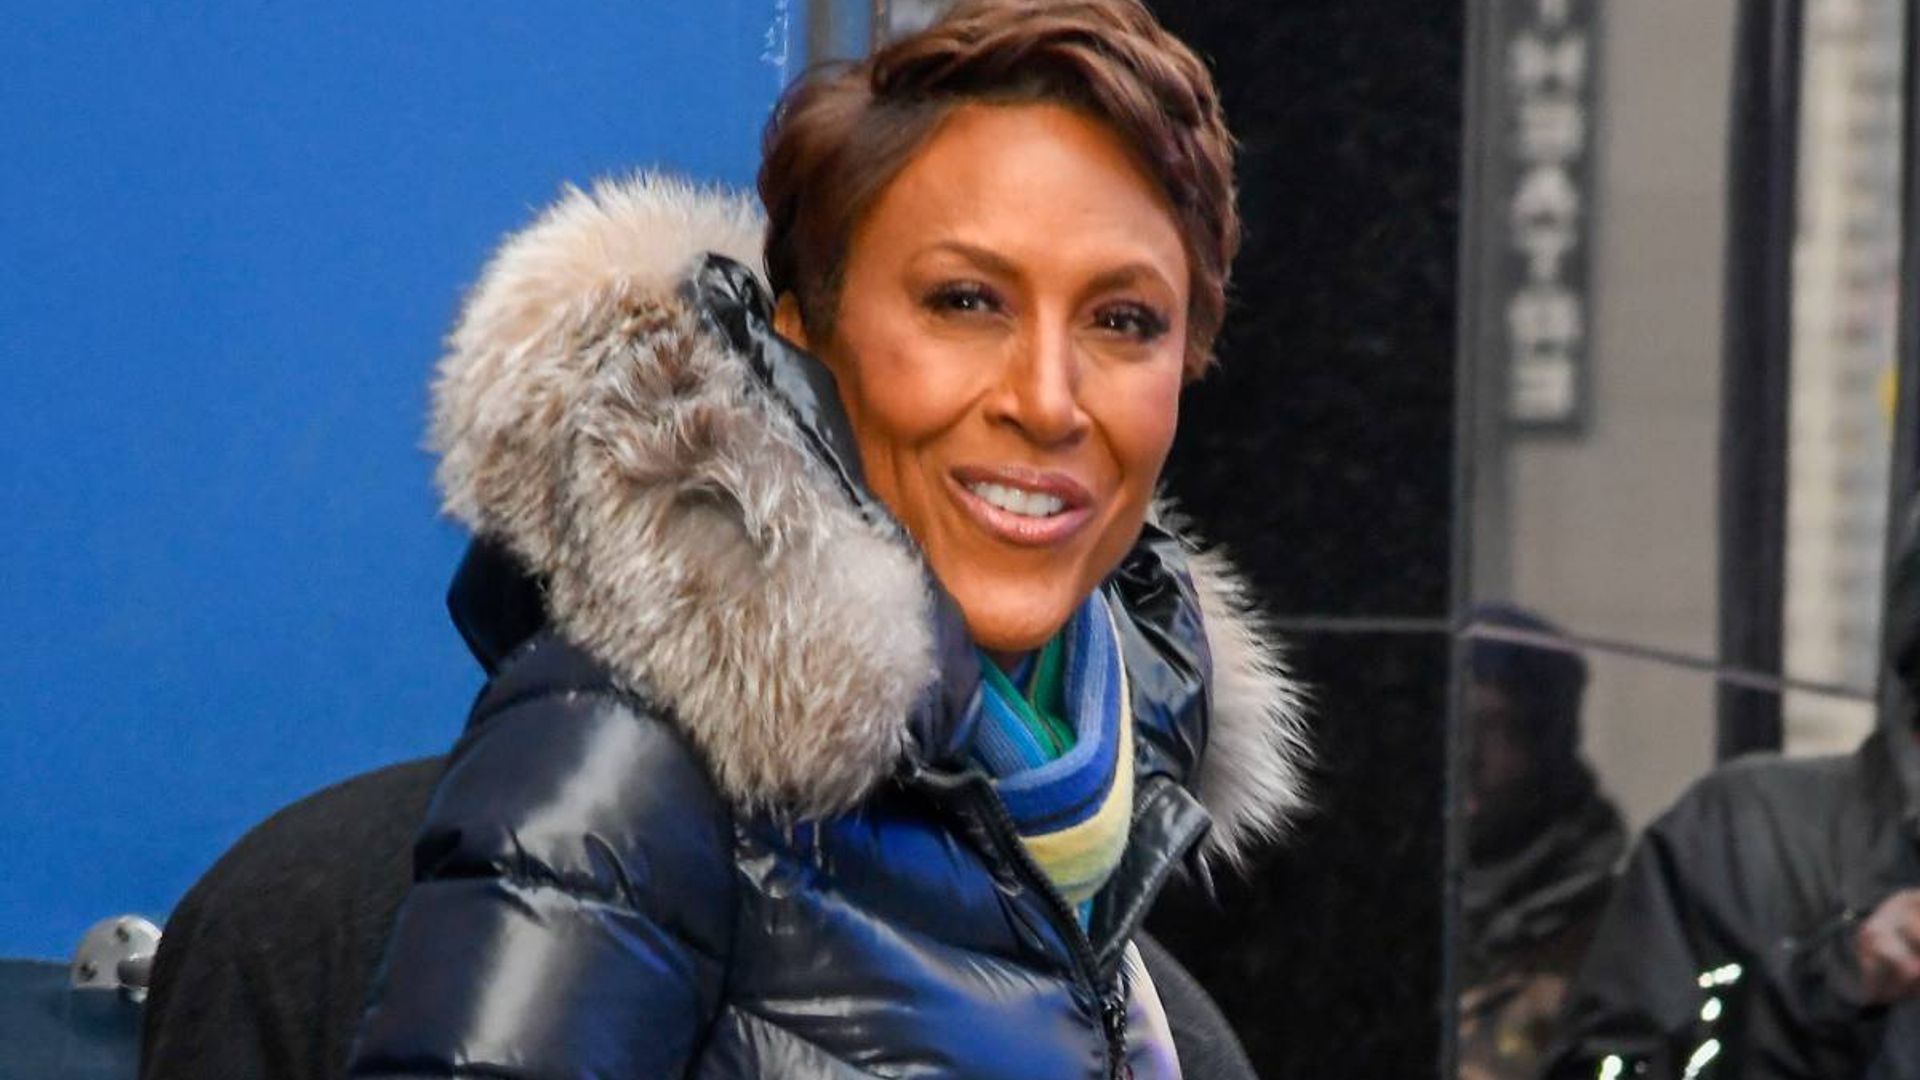 GMA's Robin Roberts could miss work due to personal reasons